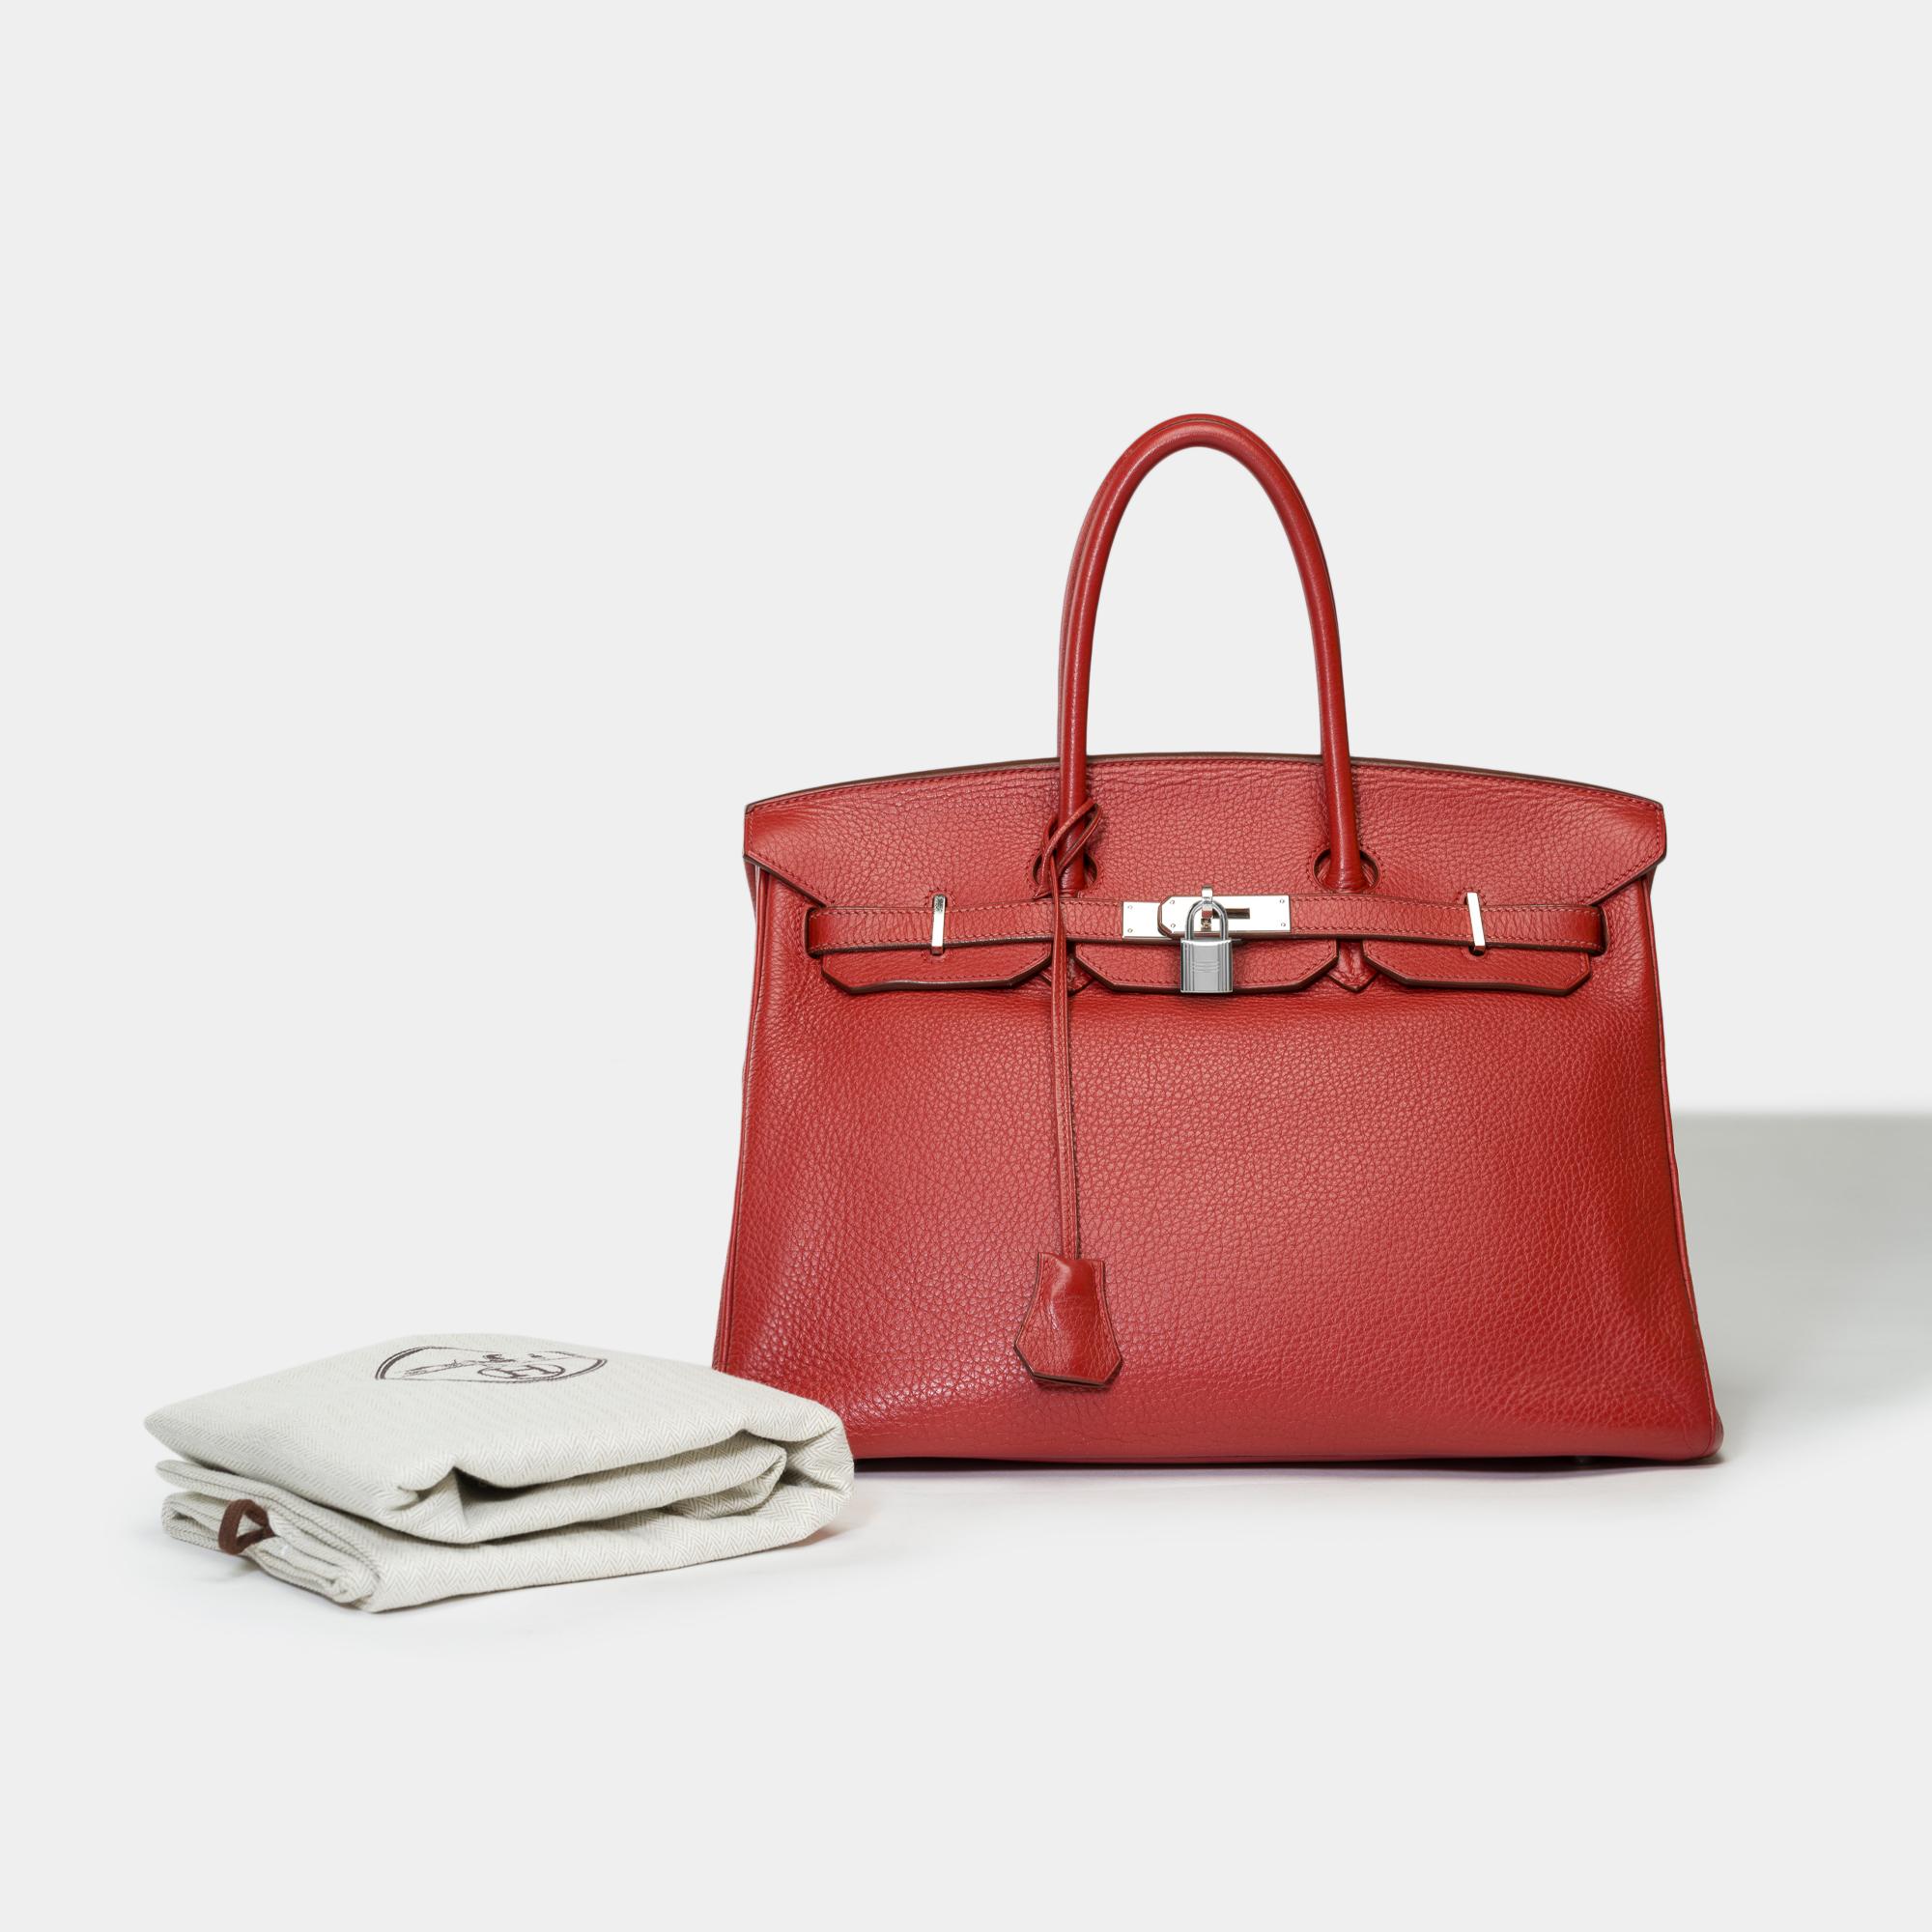 Stunning​ ​Hermès​ ​Birkin​ ​35​ ​in​ ​Sienne ​Togo​ ​leather,​ ​palladium​ ​silver​ ​metal​ ​trim​ ​,​ ​​ ​double​ ​handle​ ​in​ ​red​ ​leather​ ​allowing​ ​a​ ​hand​ ​carry

Flap​ ​closure
Red​ ​leather​ ​inner​ ​lining​ ​,​ ​a​ ​zippered​